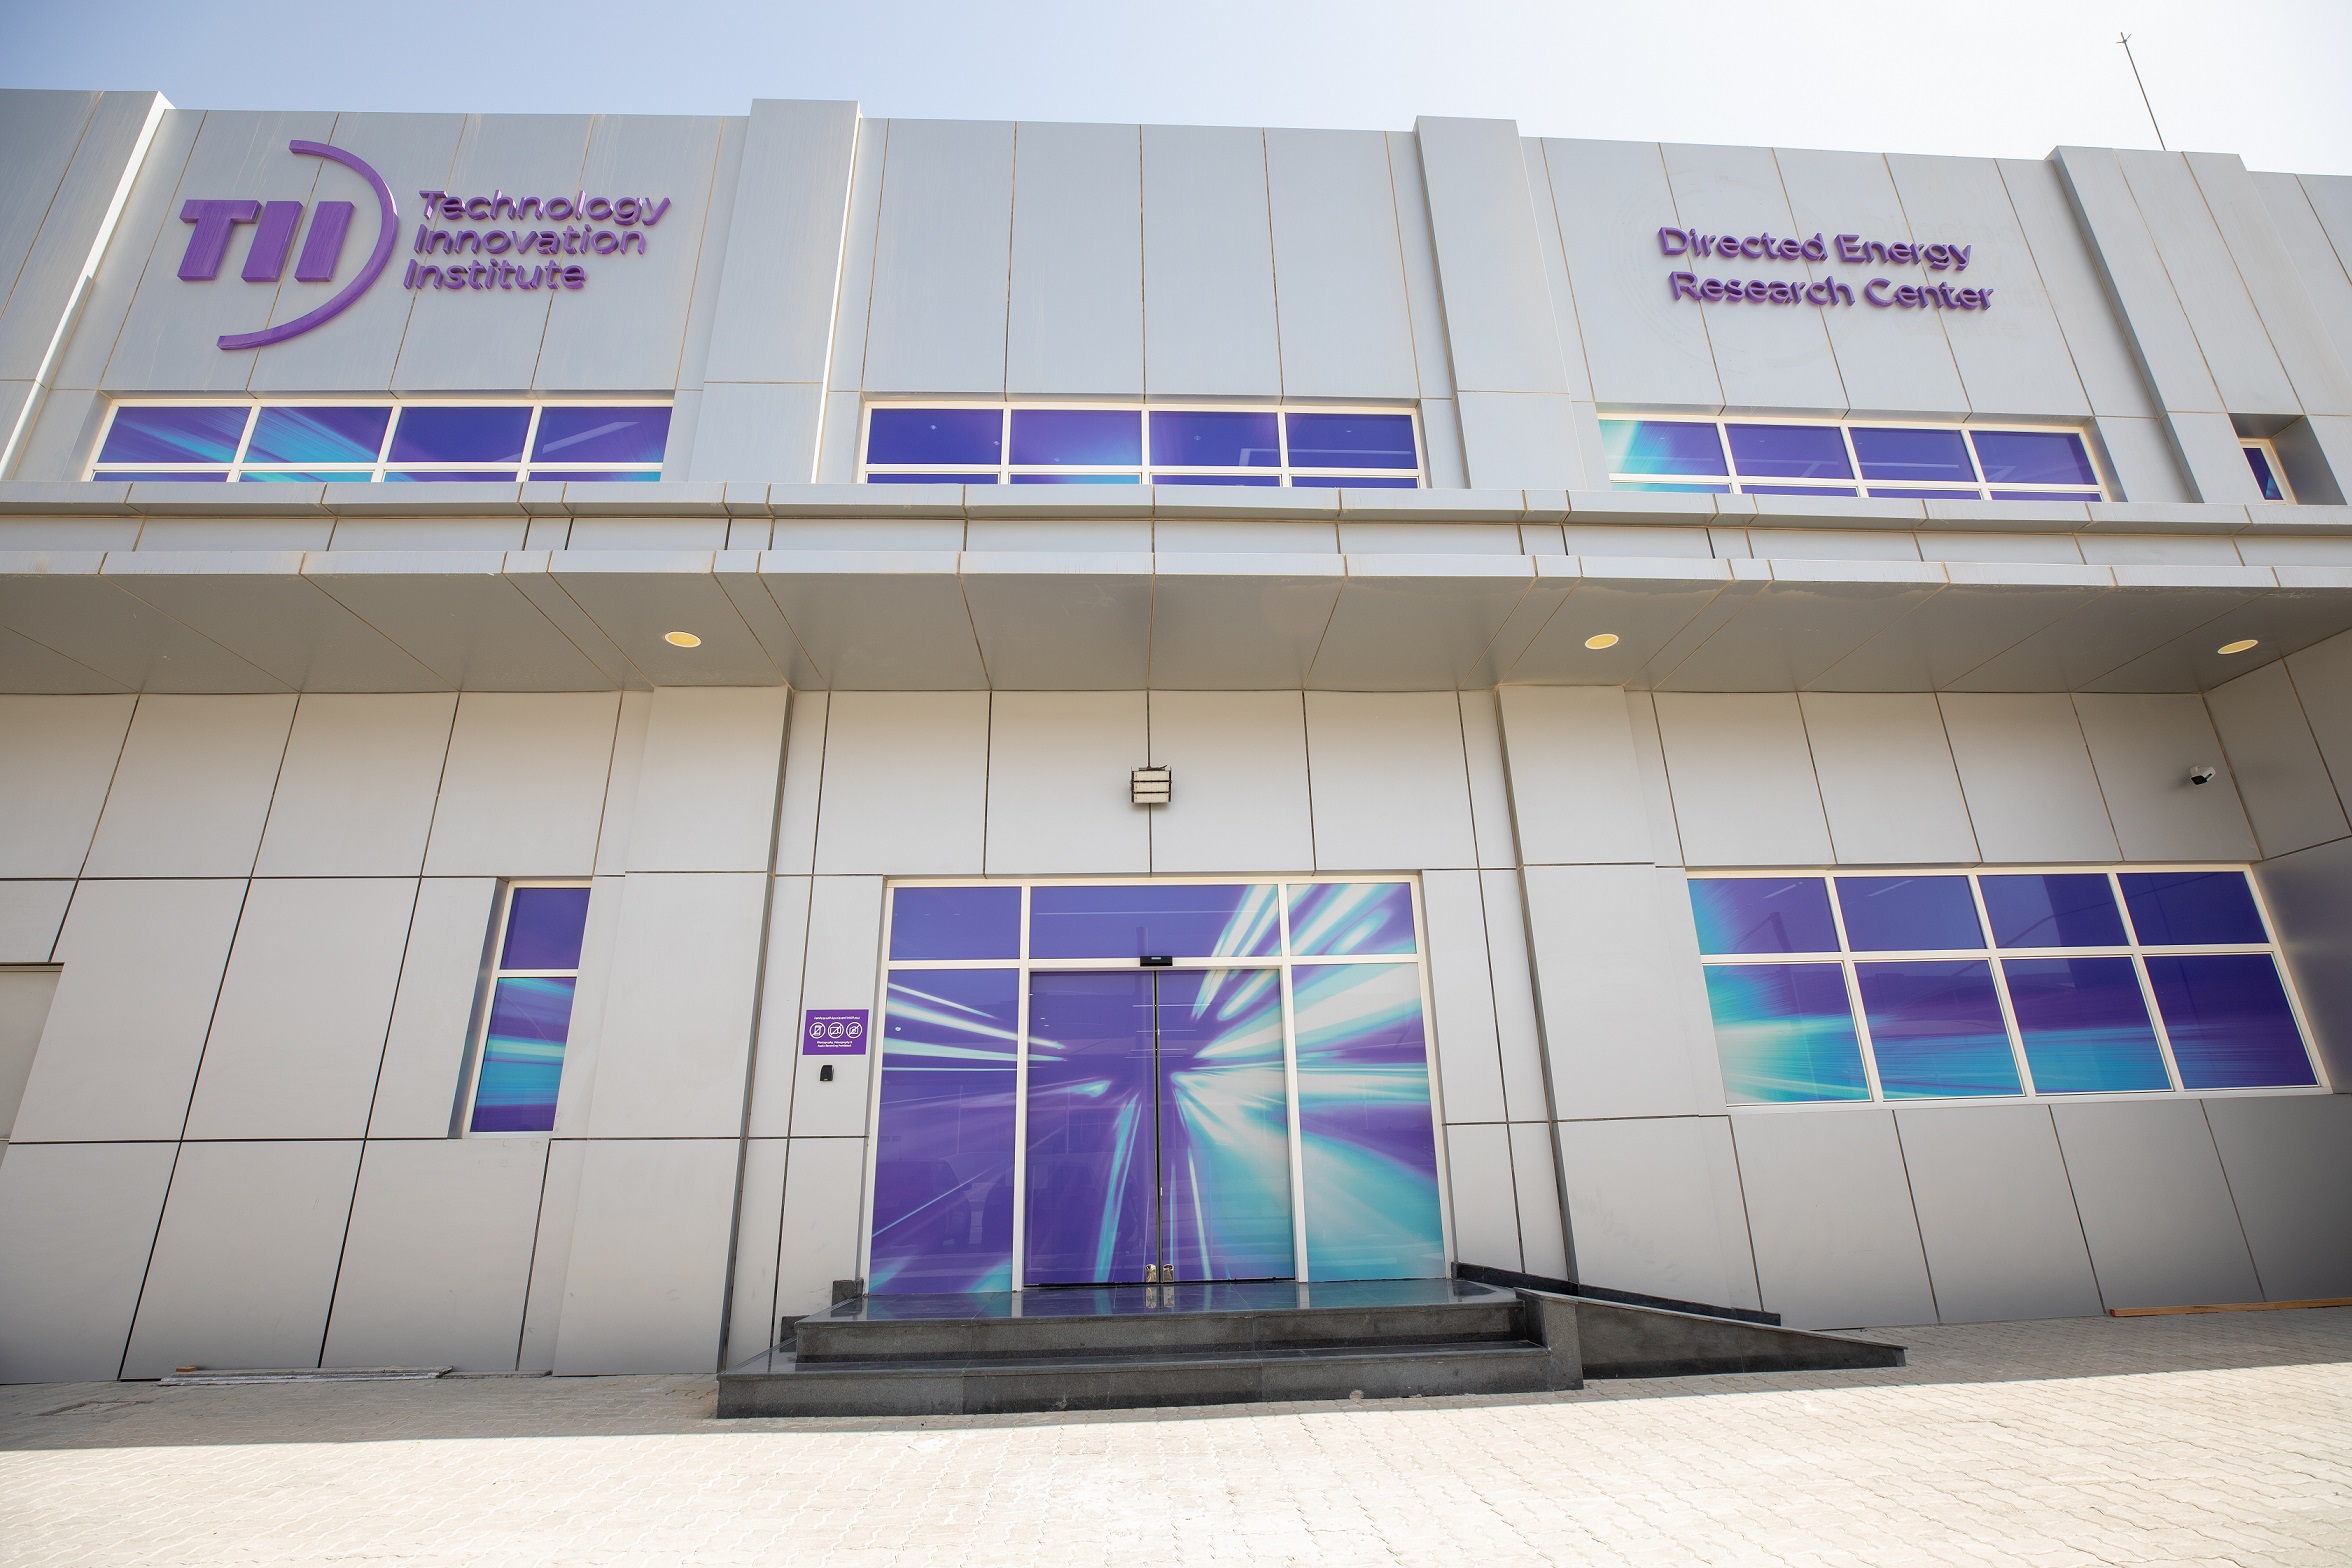 Technology Innovation Institute Launches State-Of-The-Art Research Facility In Abu Dhabi Offering Prequalification Testing For Key Industries In Region